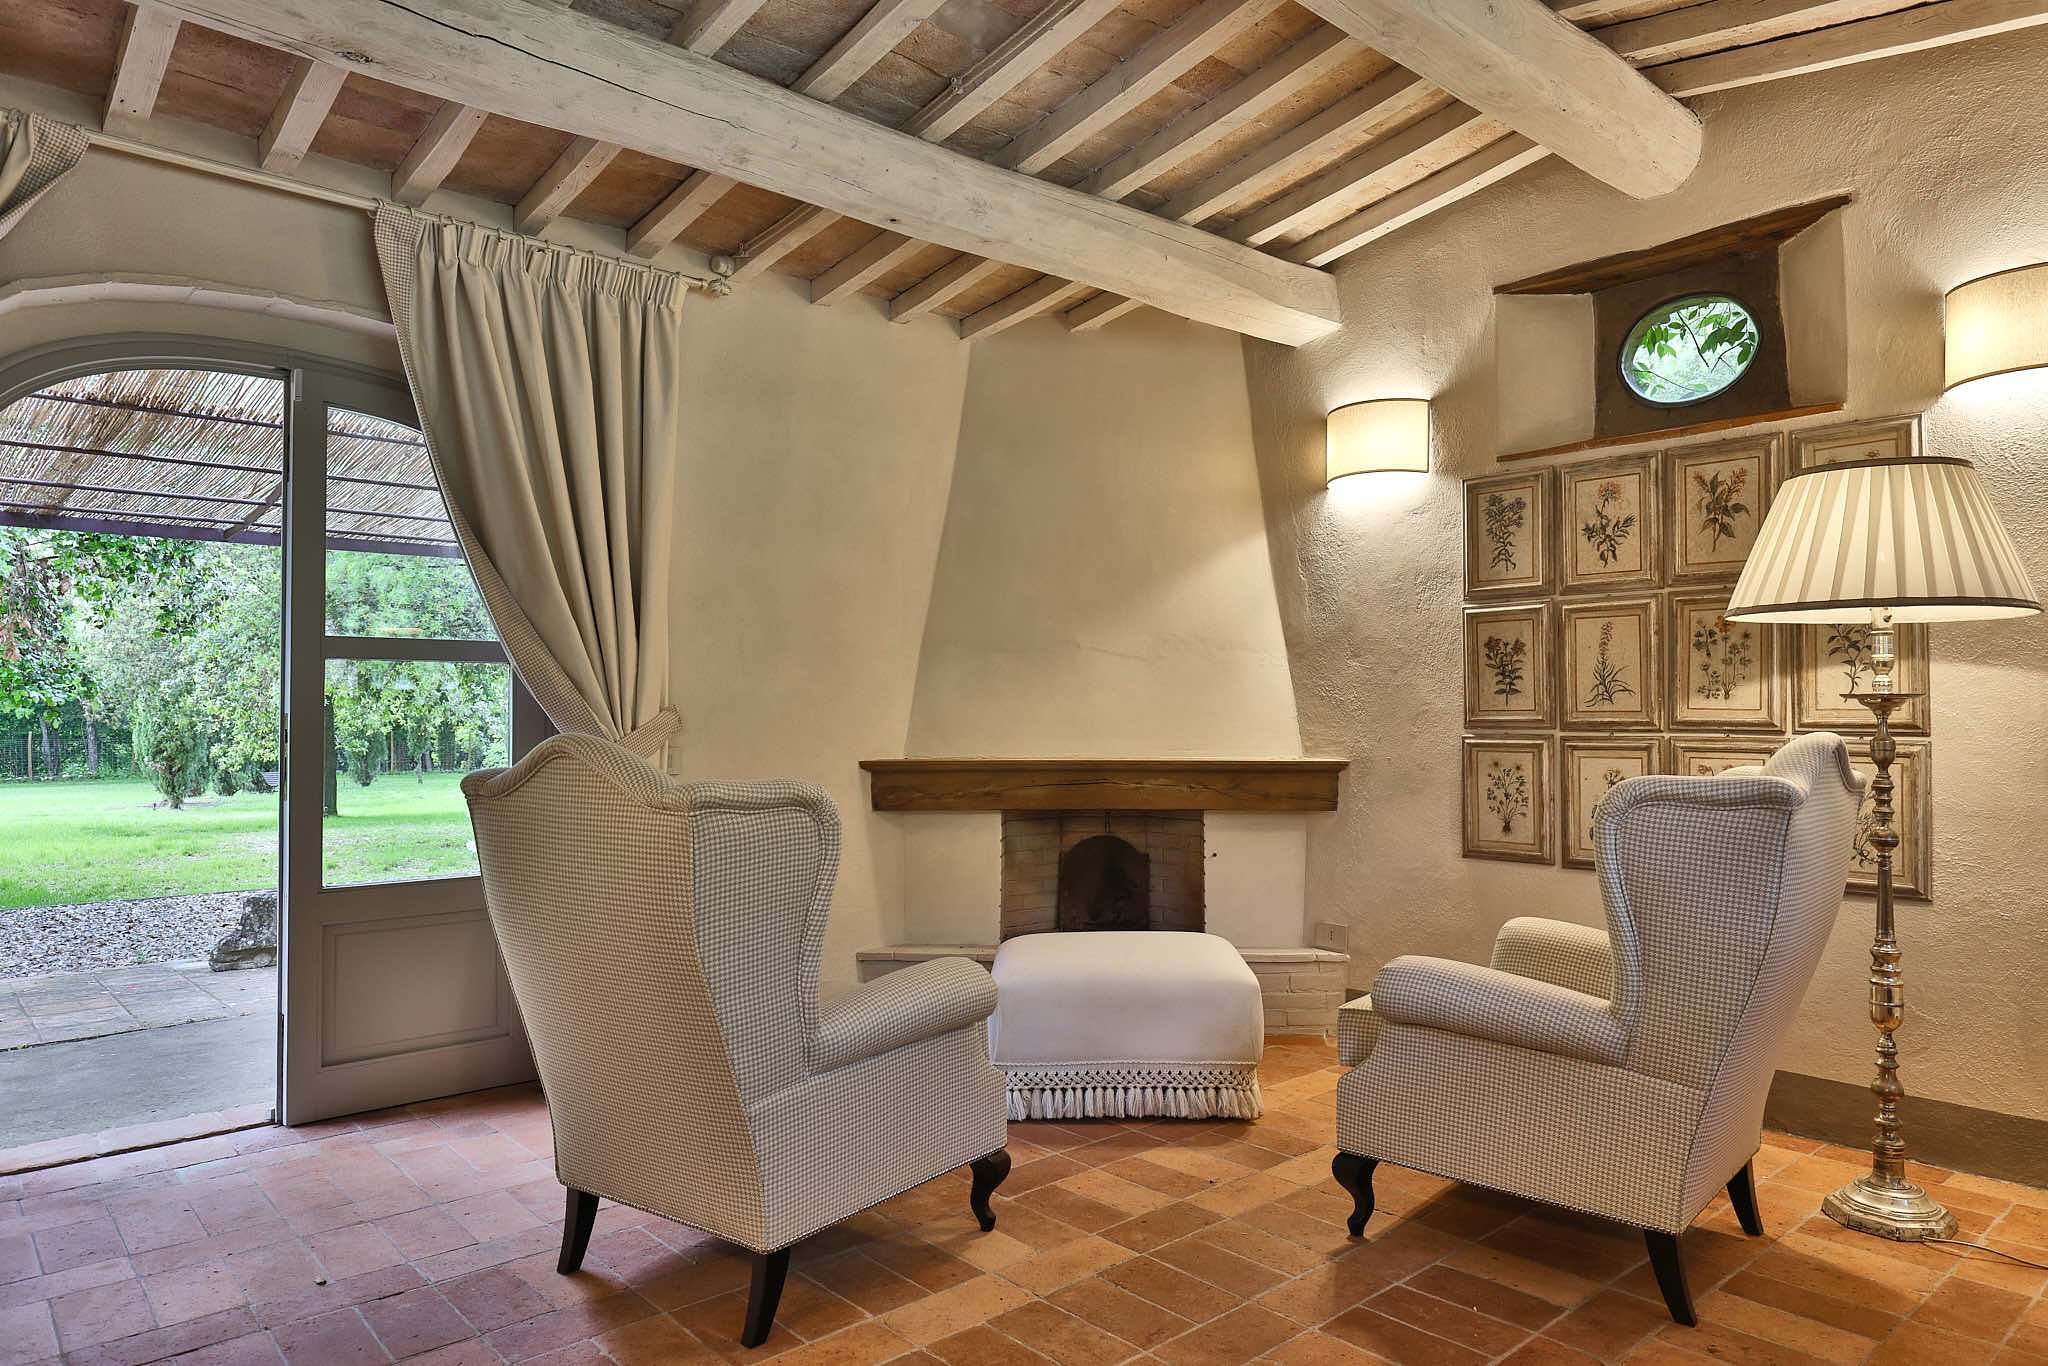 Francis York NEW Luxury Holiday Rental in the Chianti Hills, Tuscany Booking This Summer  43.jpg